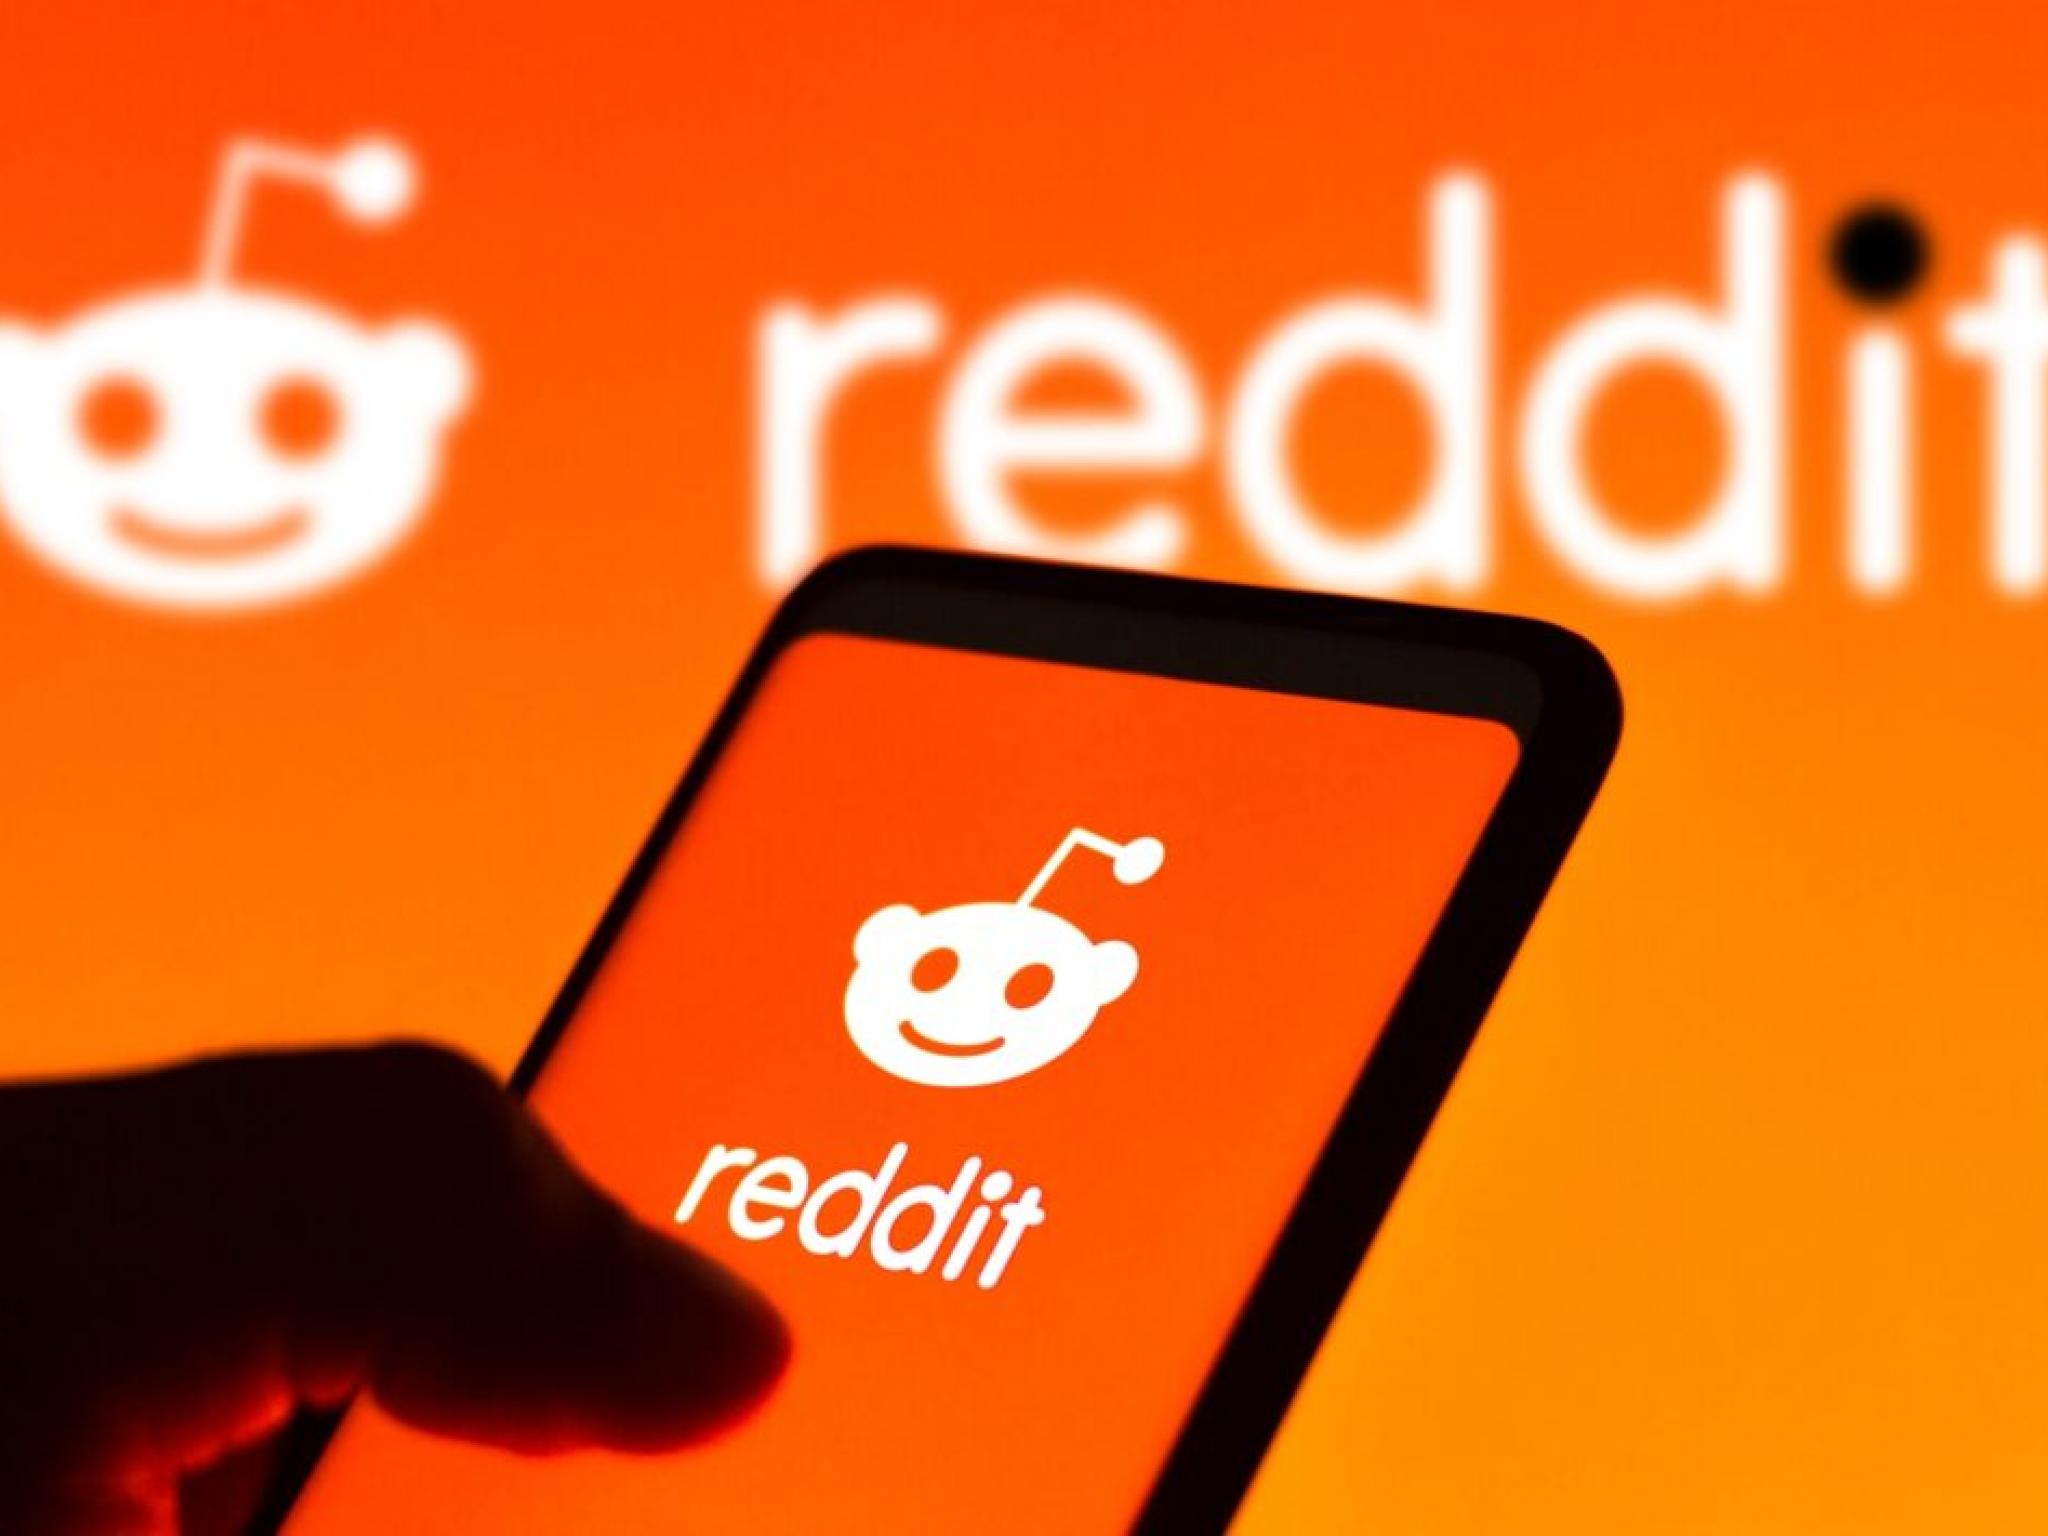  reddit-stock-surges-nearly-9-after-announcing-new-platform-update-to-block-automated-content-scraping-following-reports-of-leading-ai-startups-ignoring-rules 